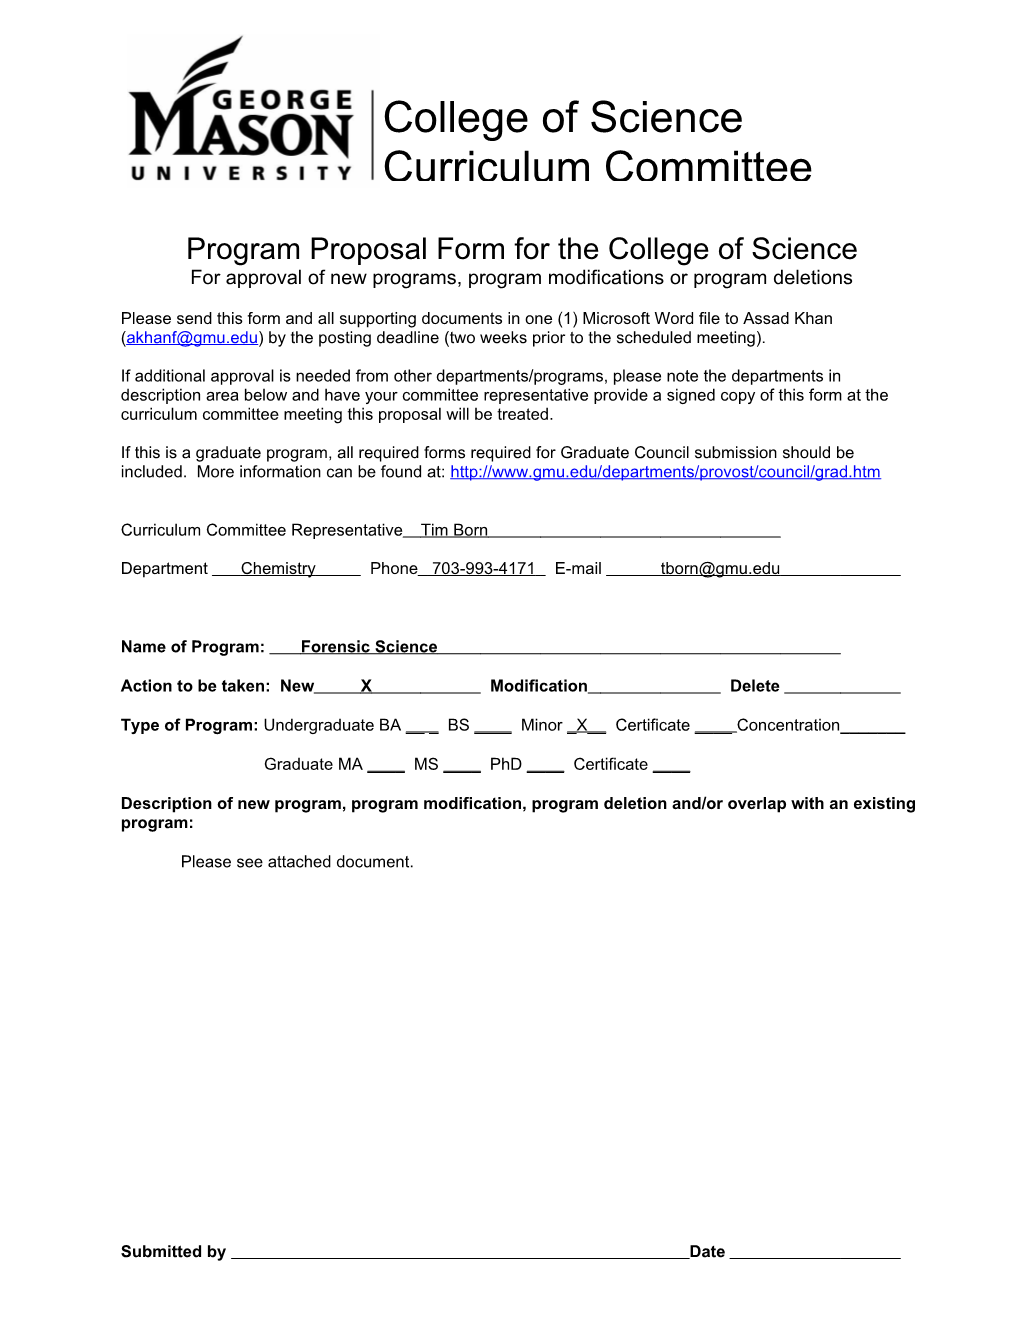 Program Proposal Form for the College of Science for Approval of New Programs, Program